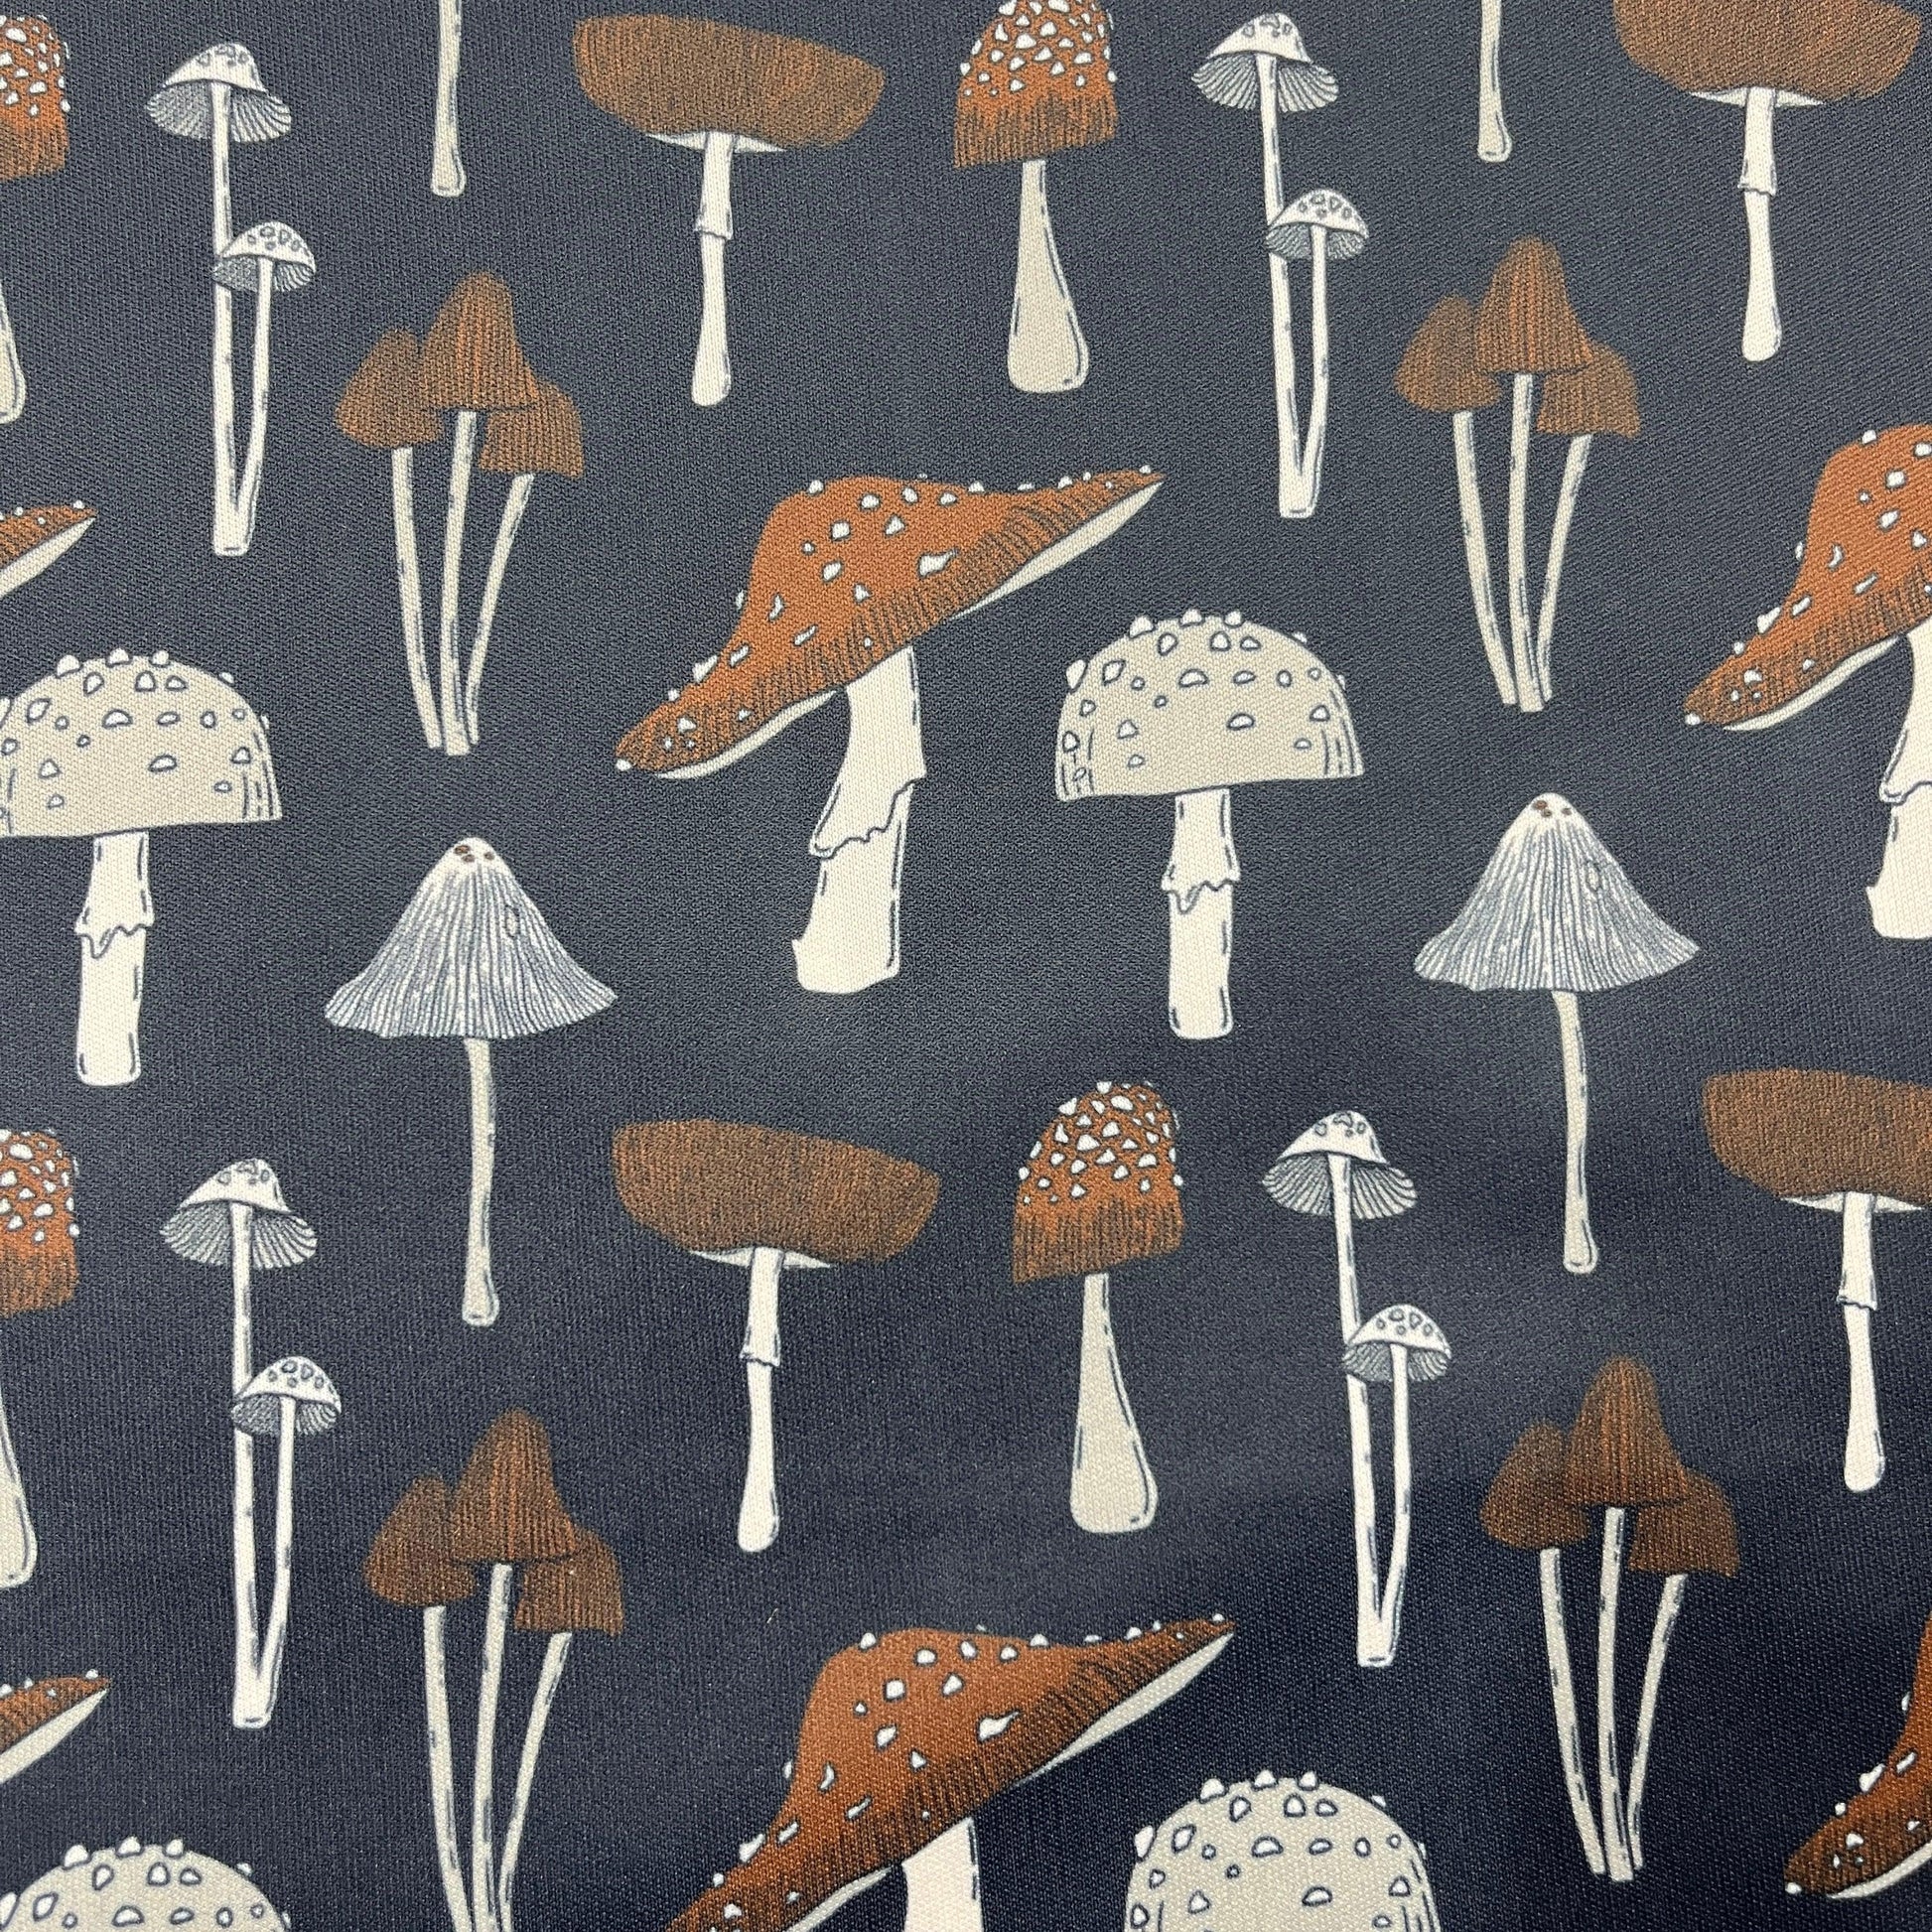 Mushrooms on Navy 1 mil PUL Fabric - Made in the USA - Nature's Fabrics